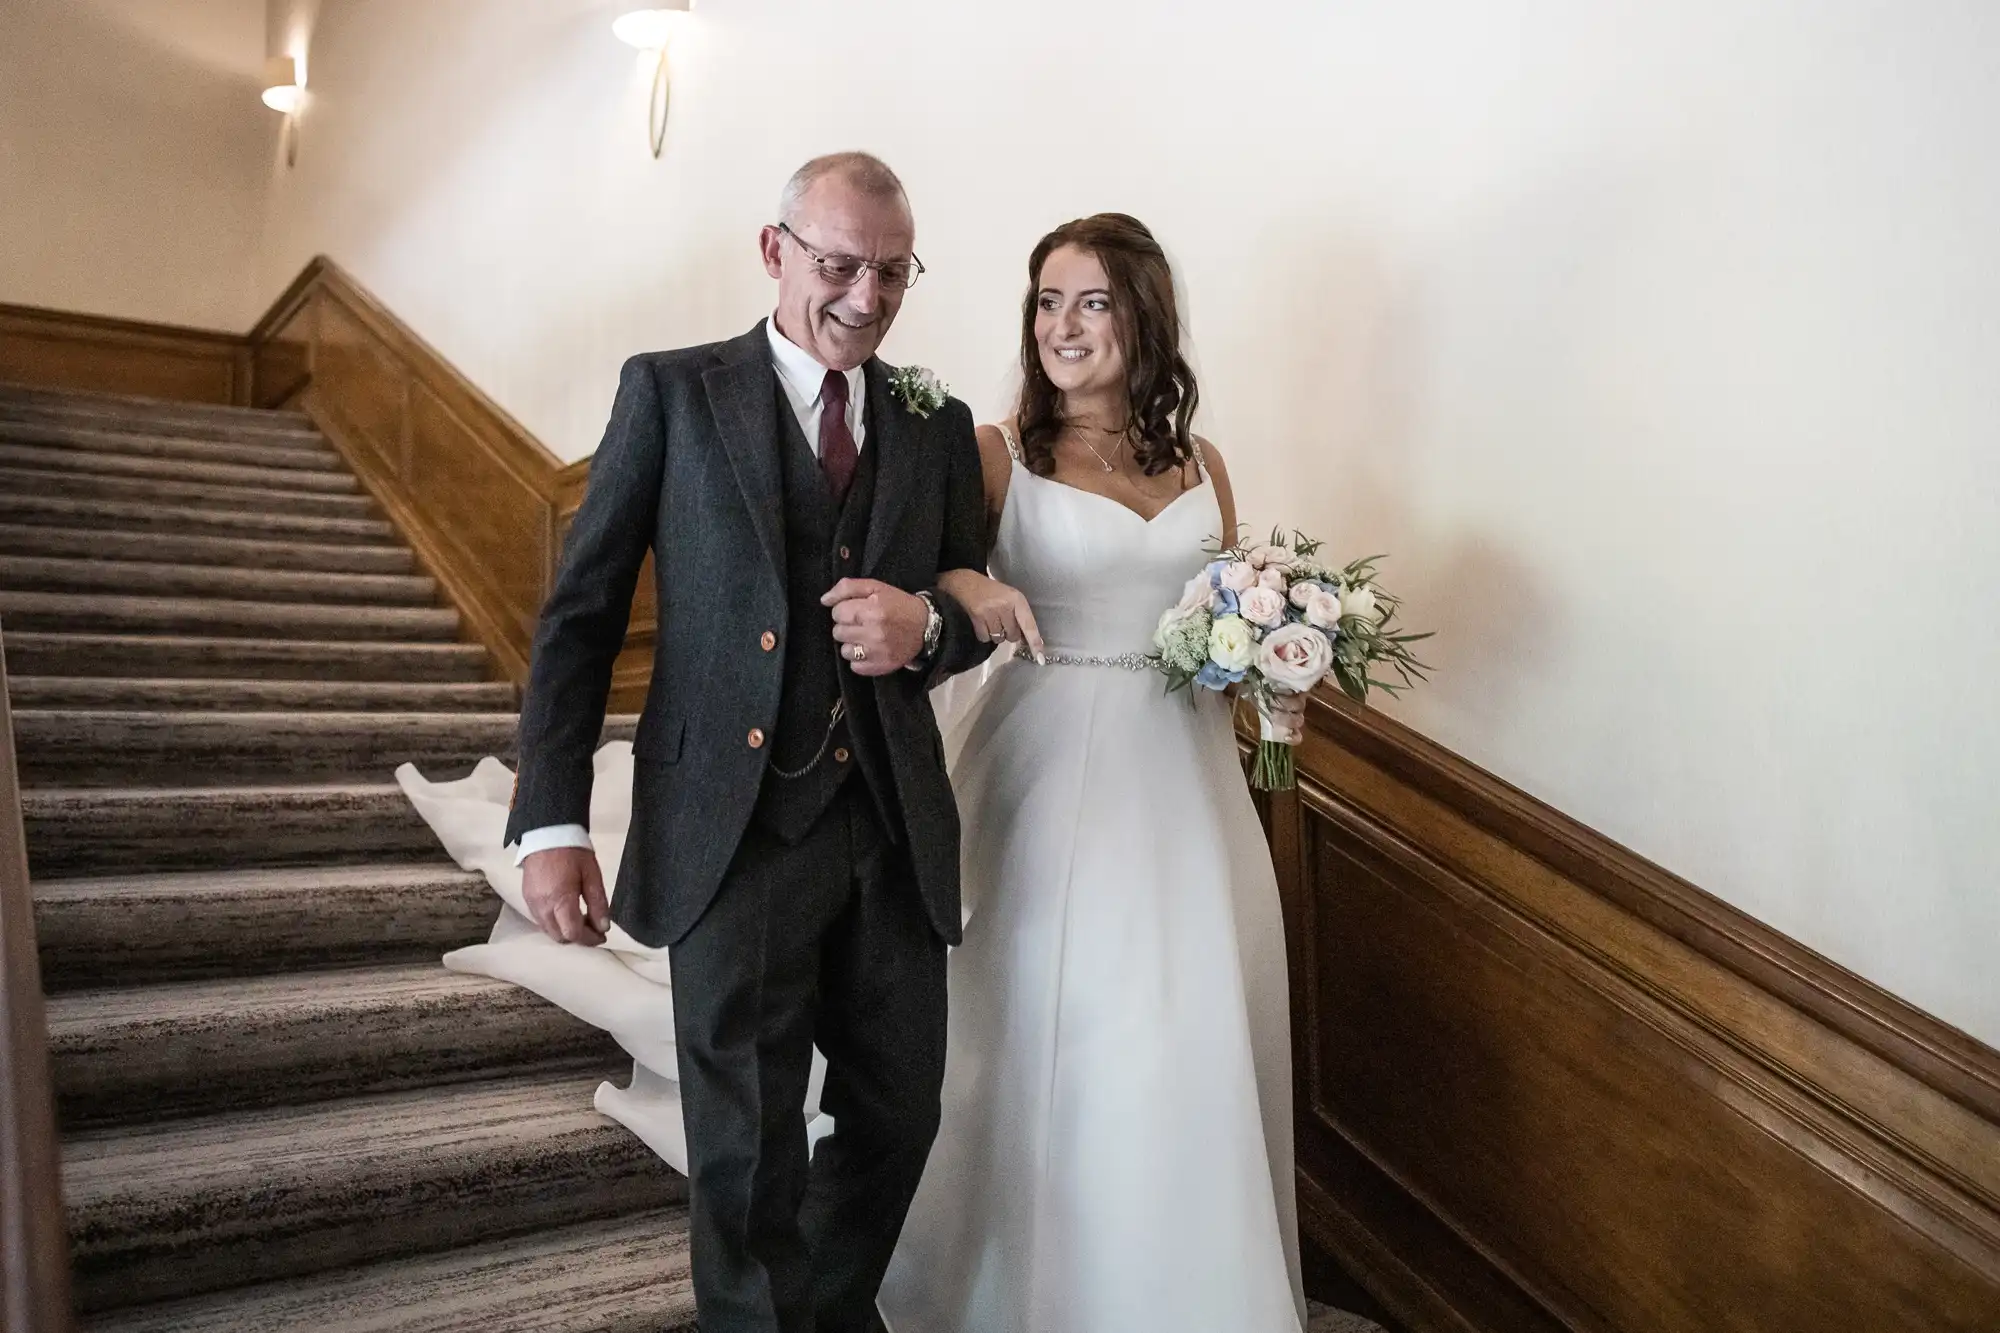 A bride in a white gown and her father in a gray suit and glasses descend a staircase, both smiling, with the bride holding a bouquet of pastel flowers.